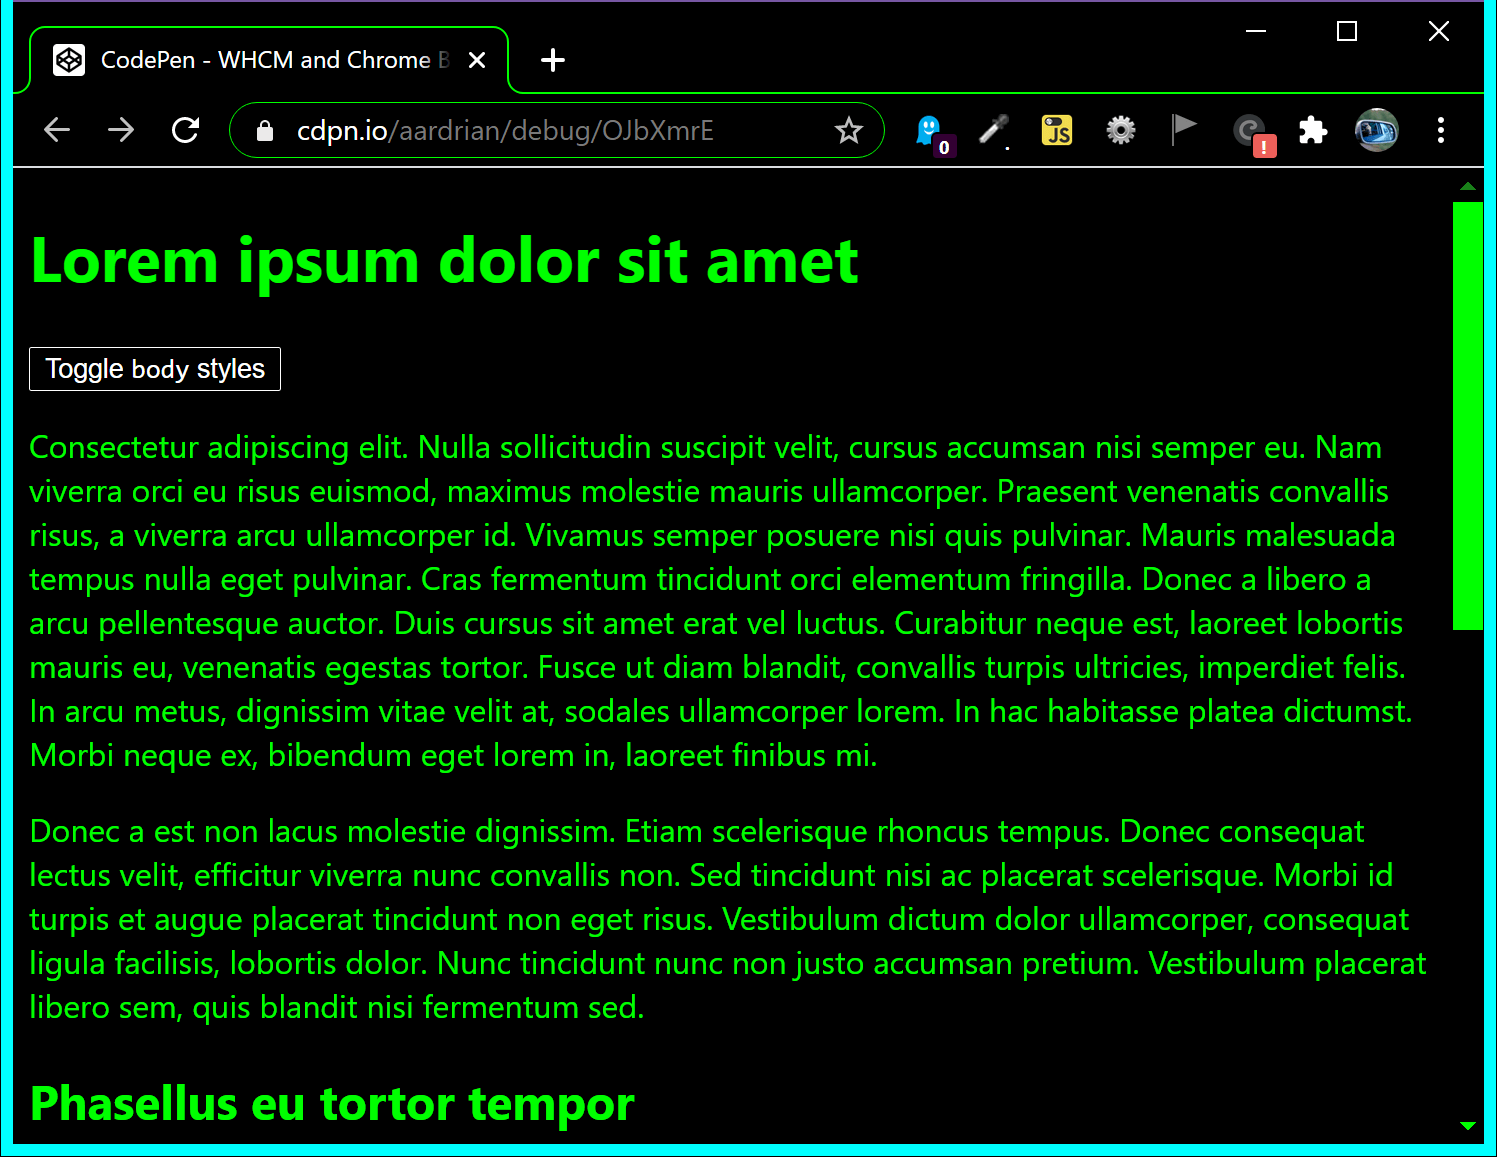 The test page in Chrome 89 showing it supports the system color scheme.